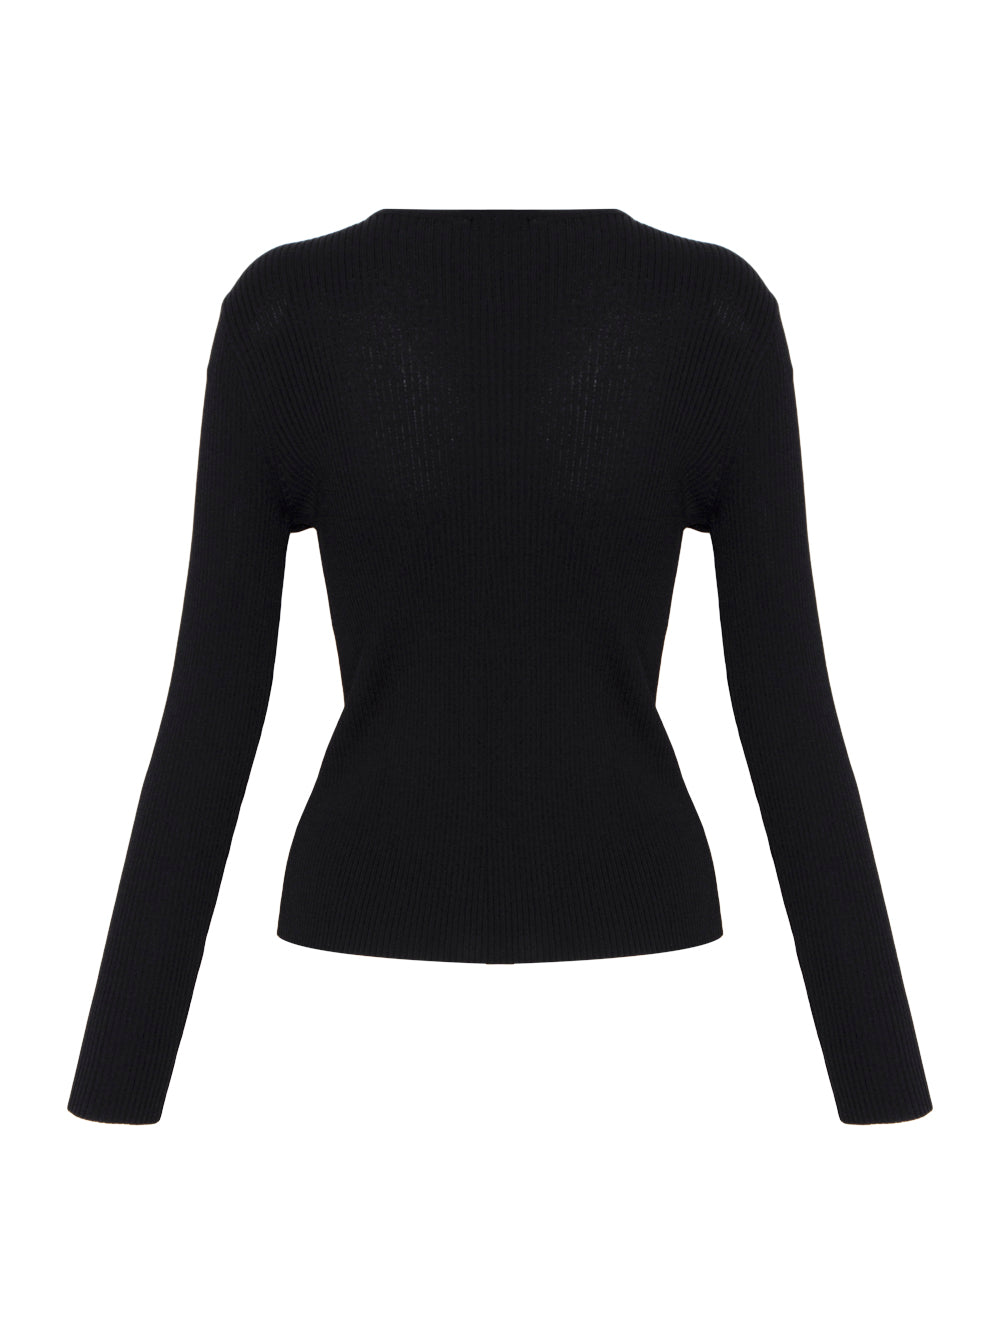 Long Sleeve Ribbed Zip Front Sweater (Black)